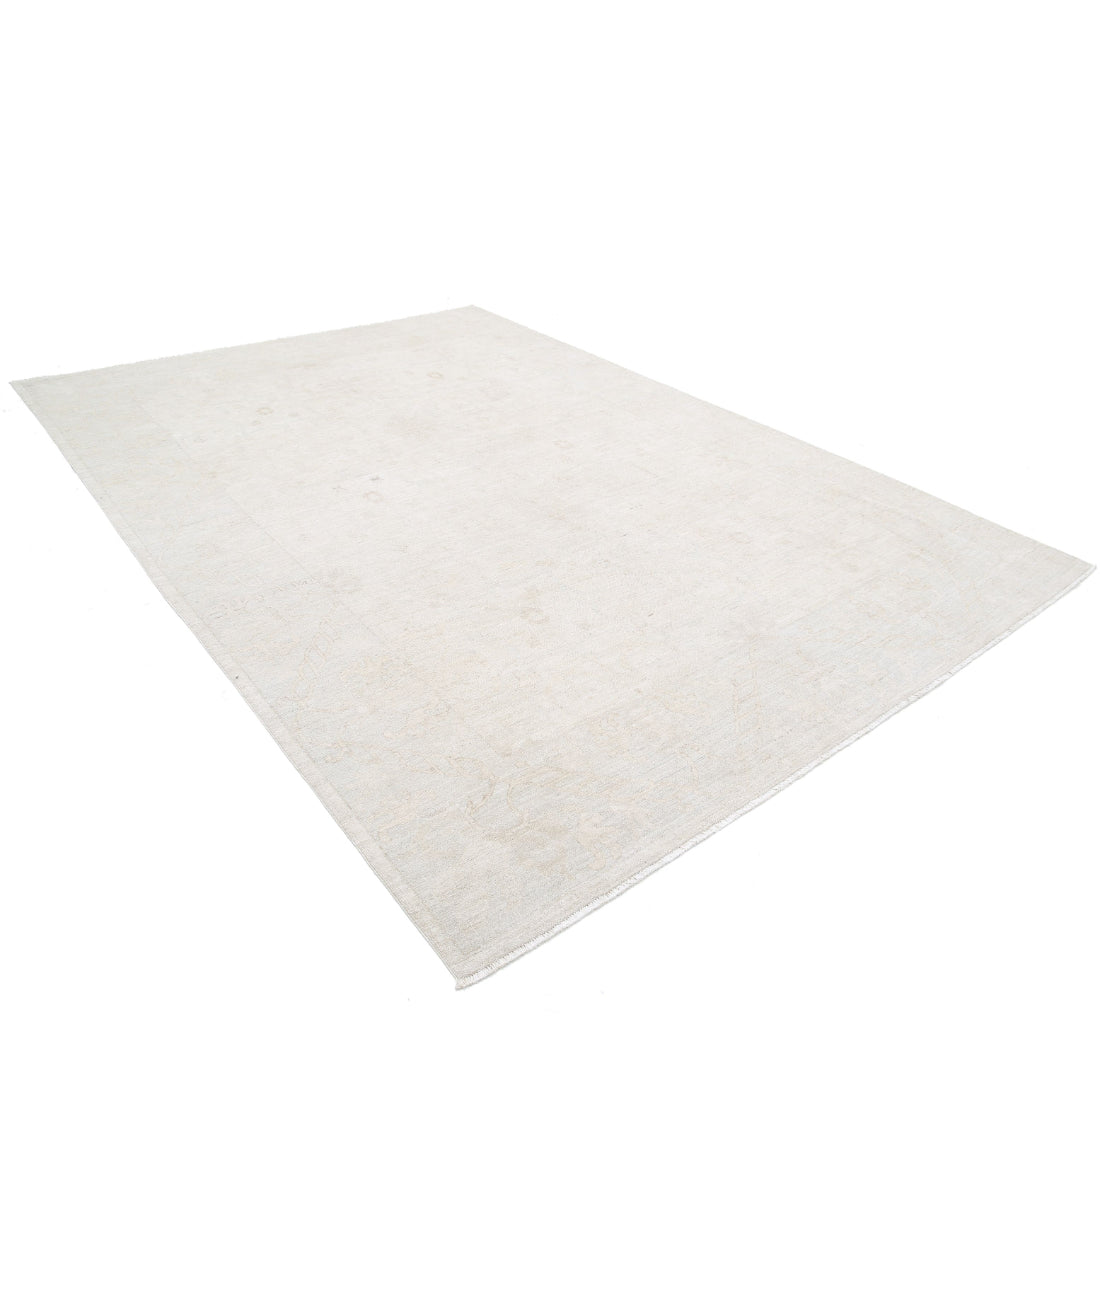 Hand Knotted Oushak Wool Rug - 8'5'' x 11'11'' 8'5'' x 11'11'' (253 X 358) / Ivory / Taupe